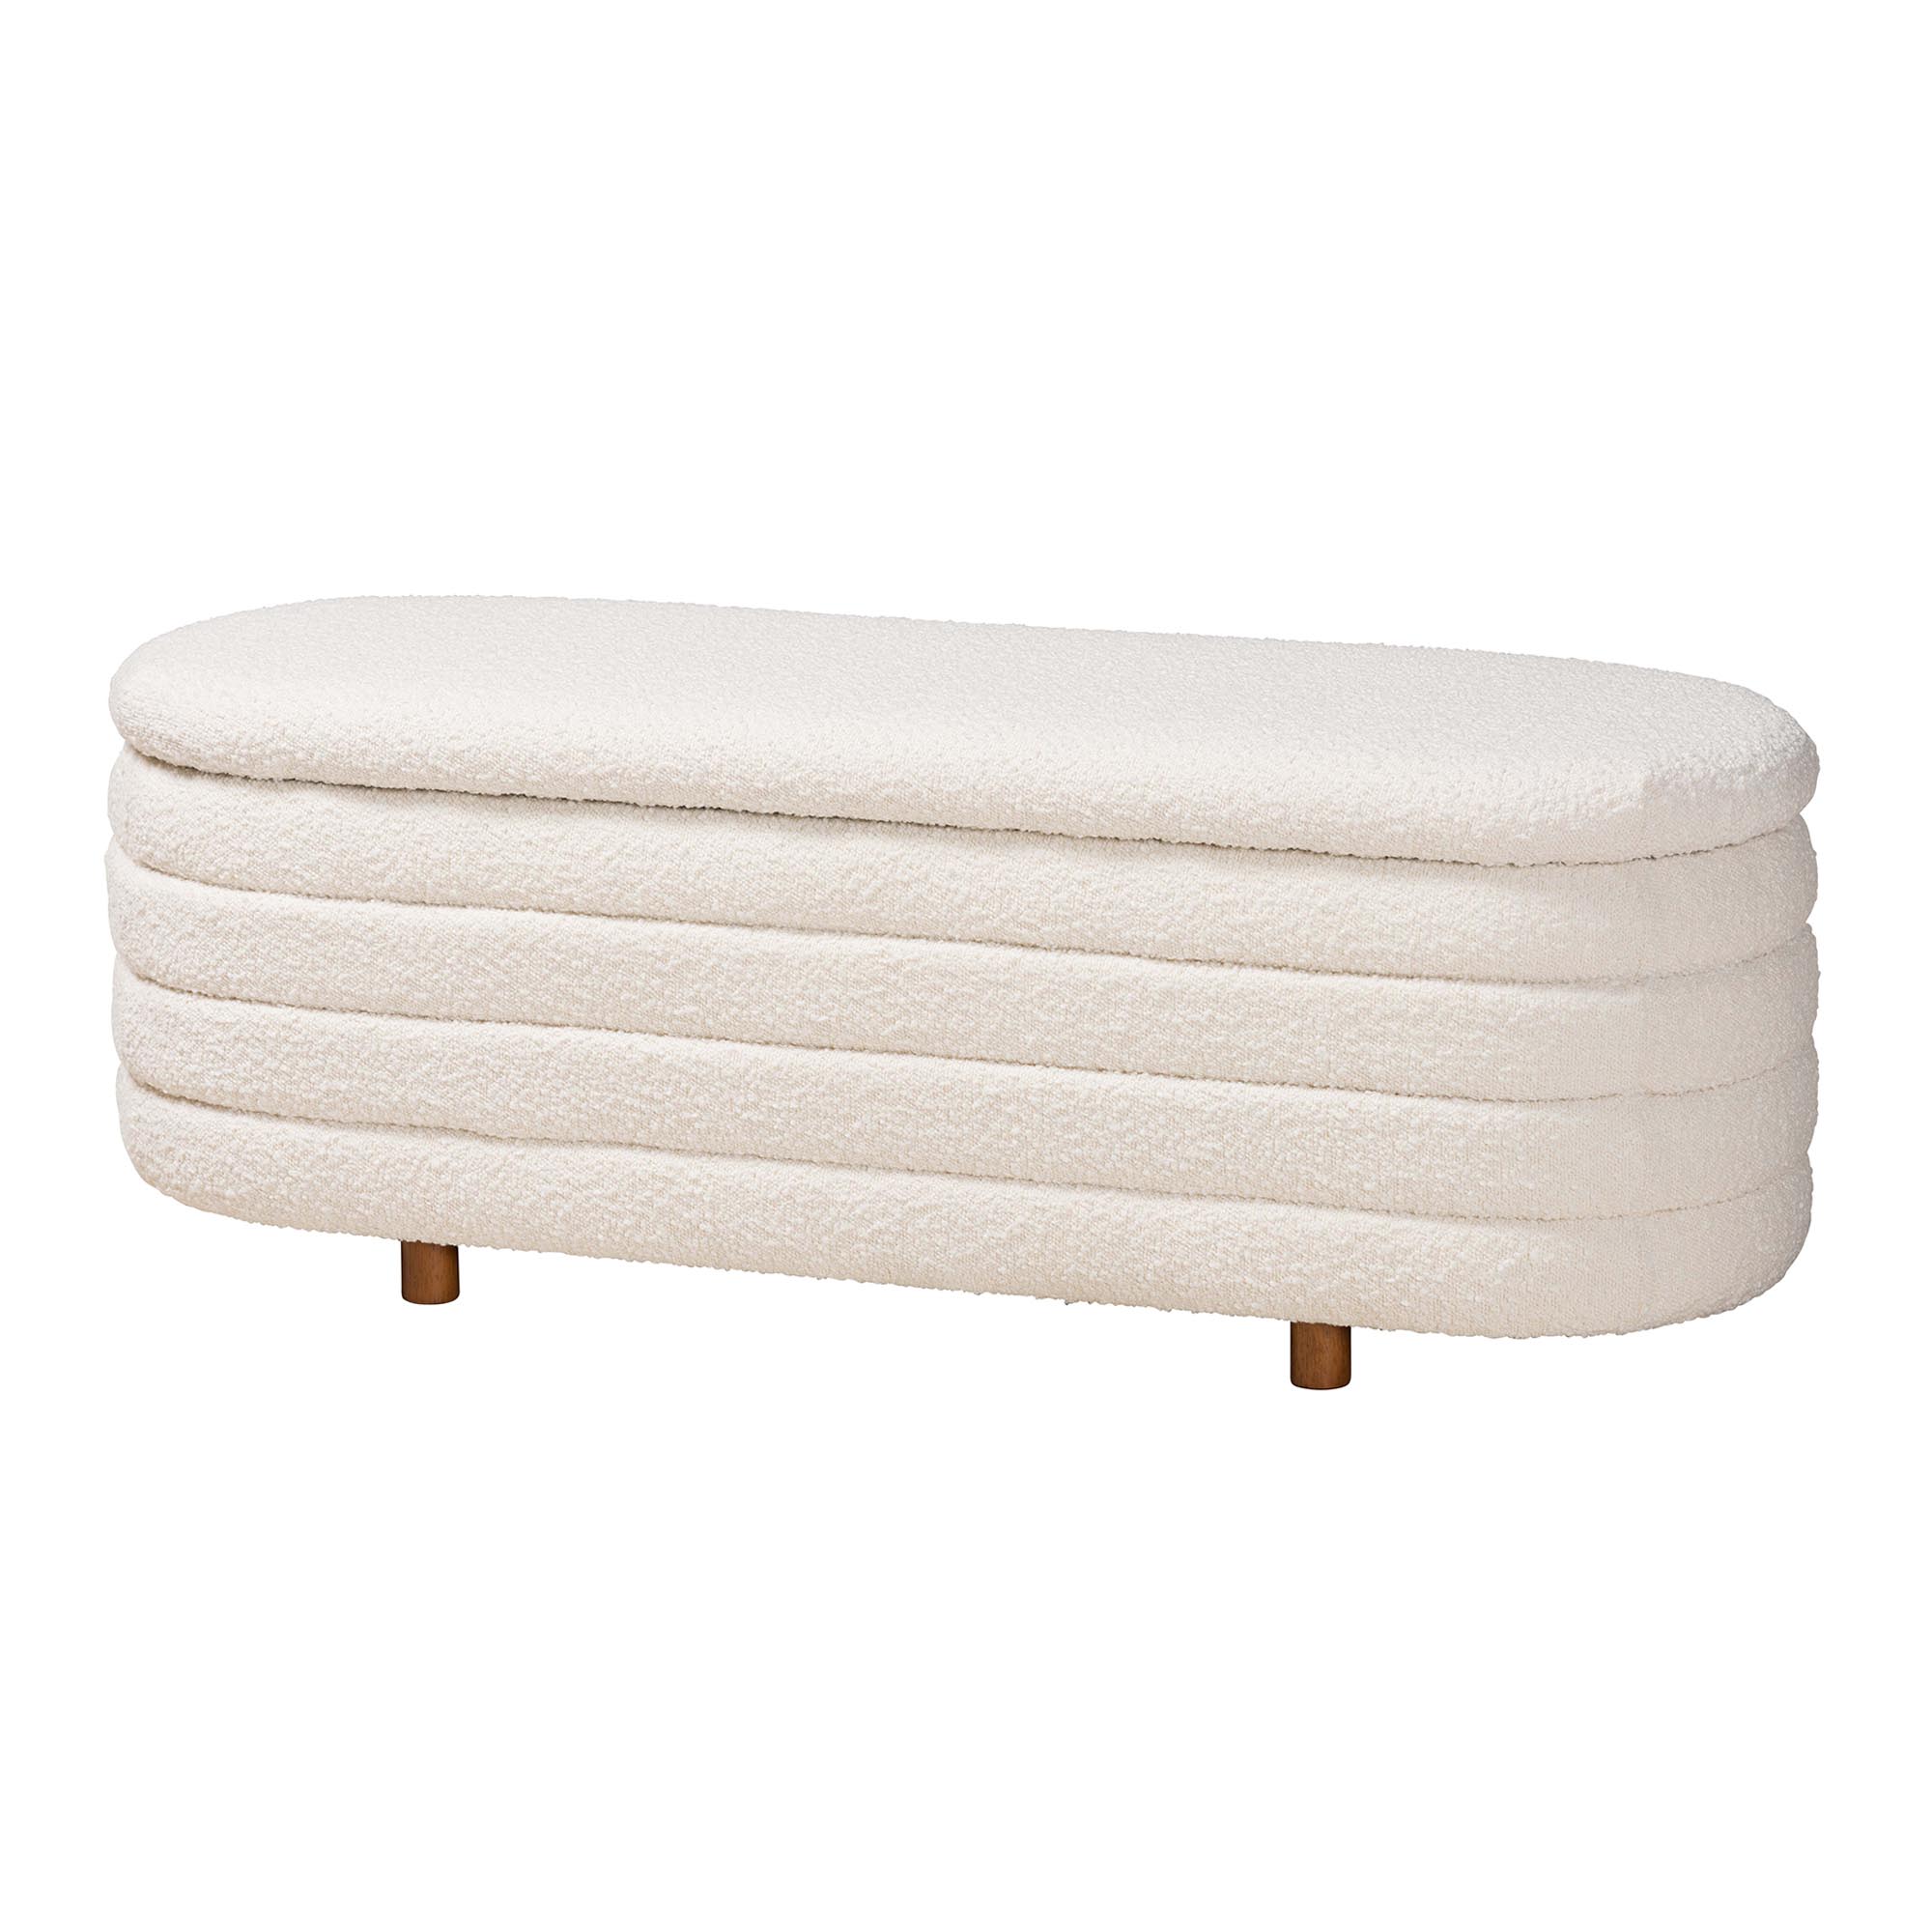 Beige Fur Footrest with Storage and Stable Wooden Legs